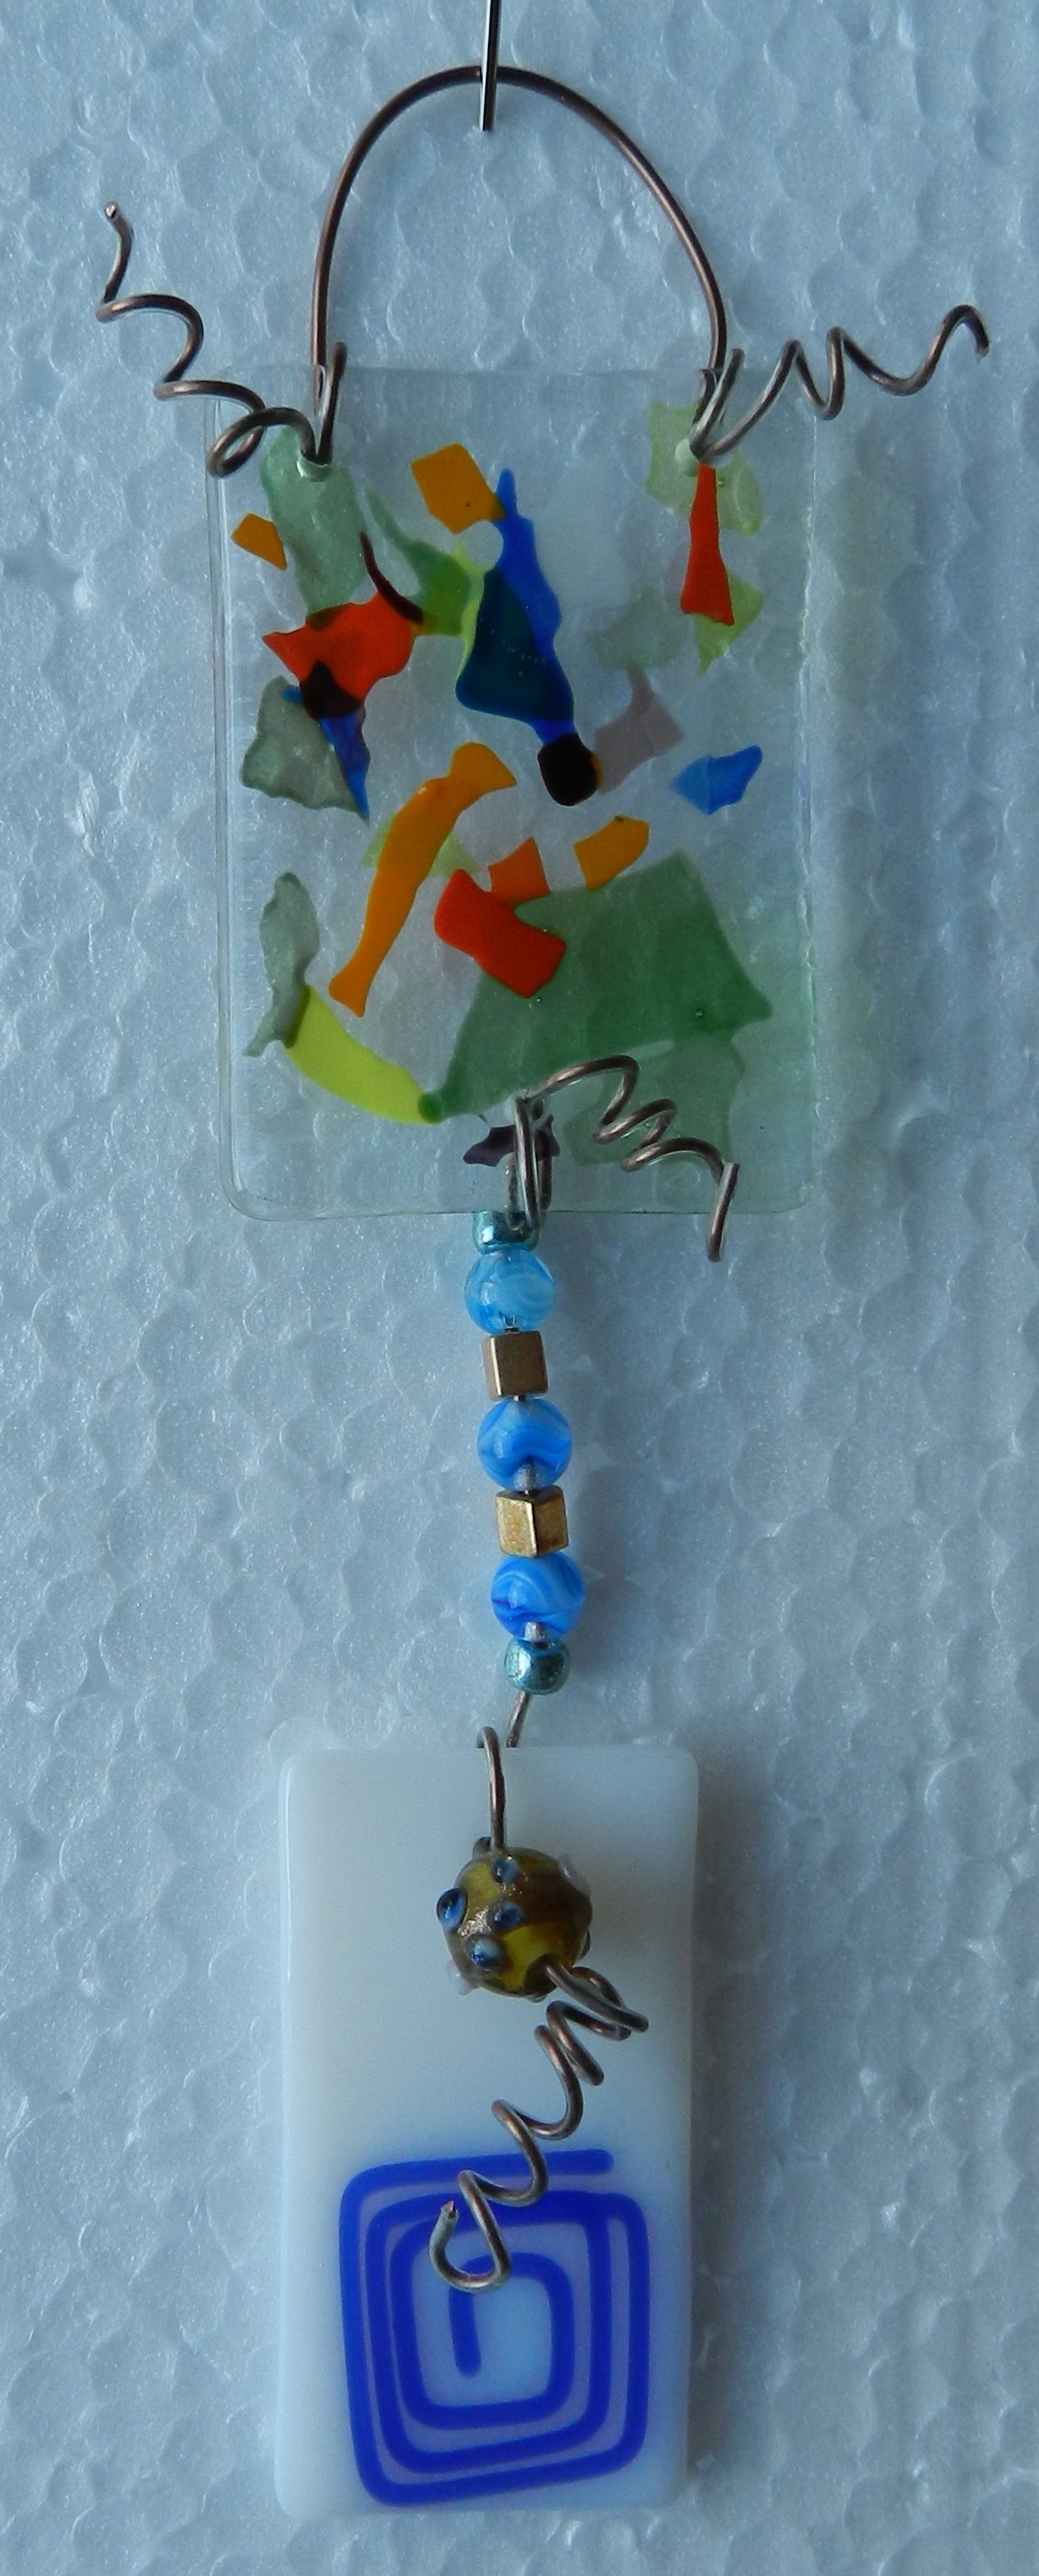 handcrafted recycled glass suncatcher made in the USA